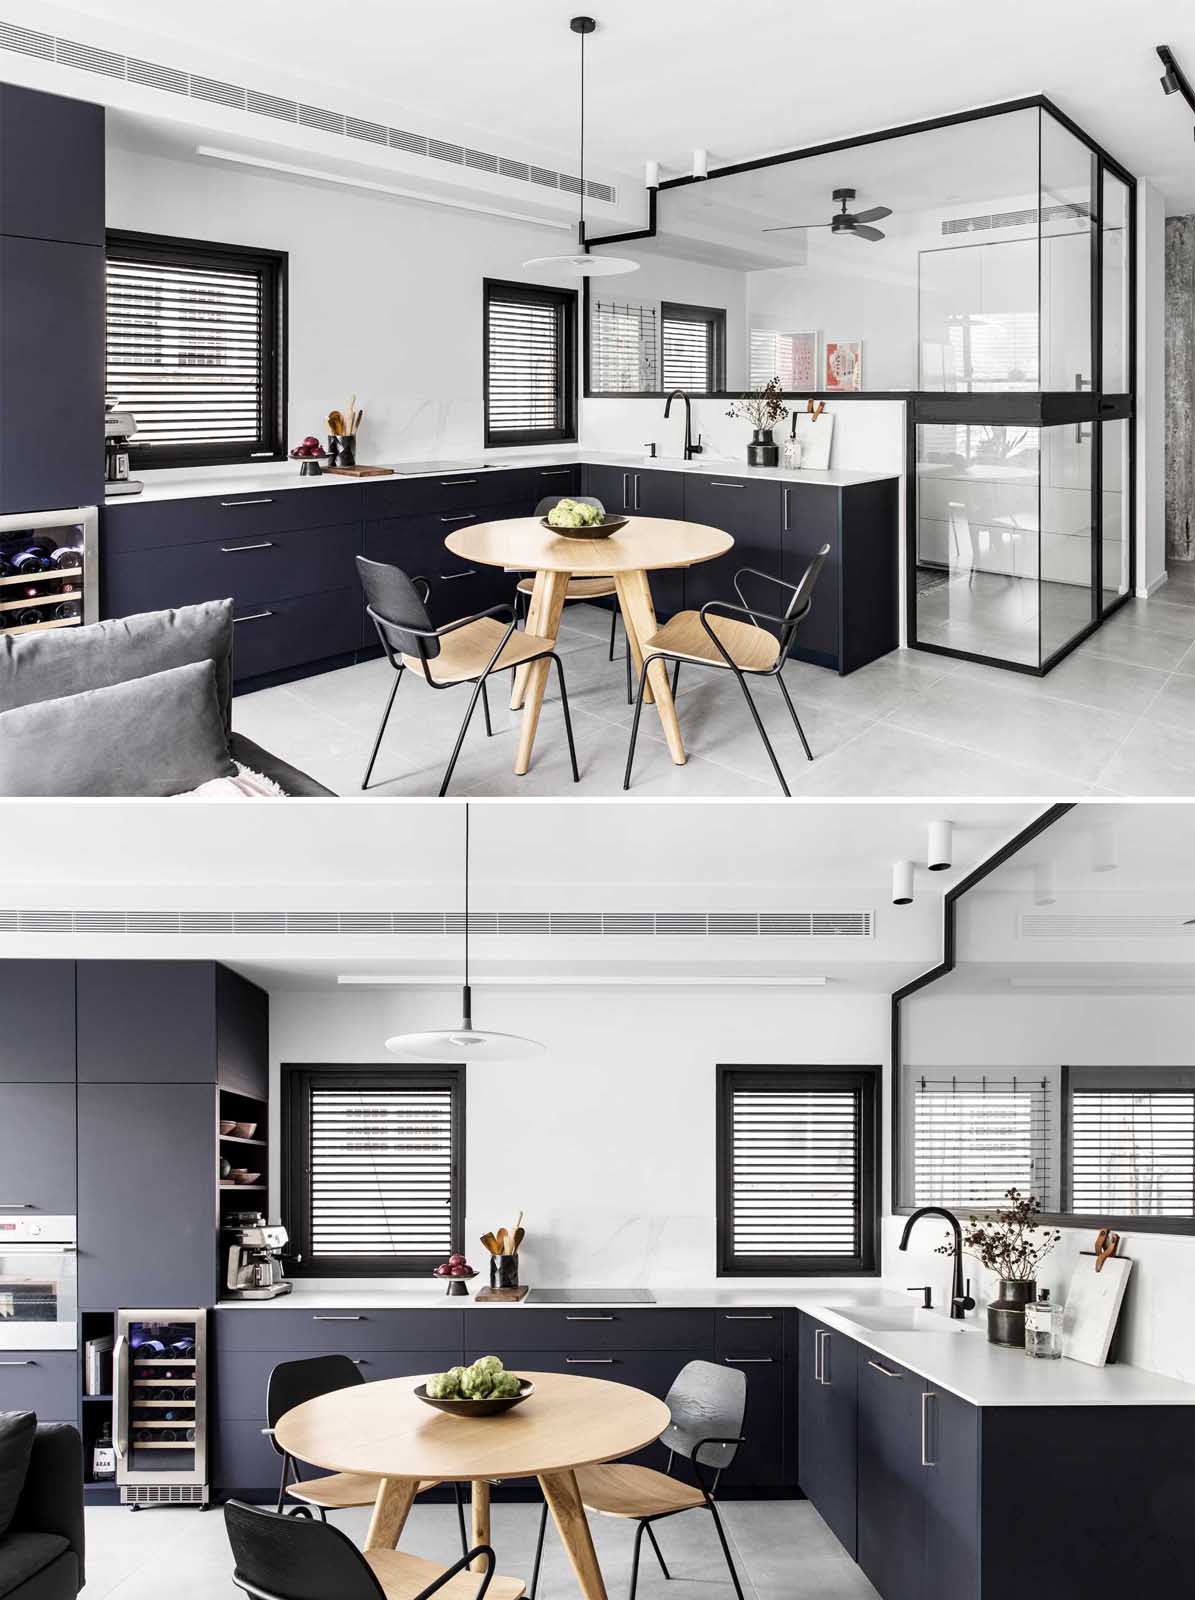 A modern matte black kitchen with a home office tucked away behind glass walls.